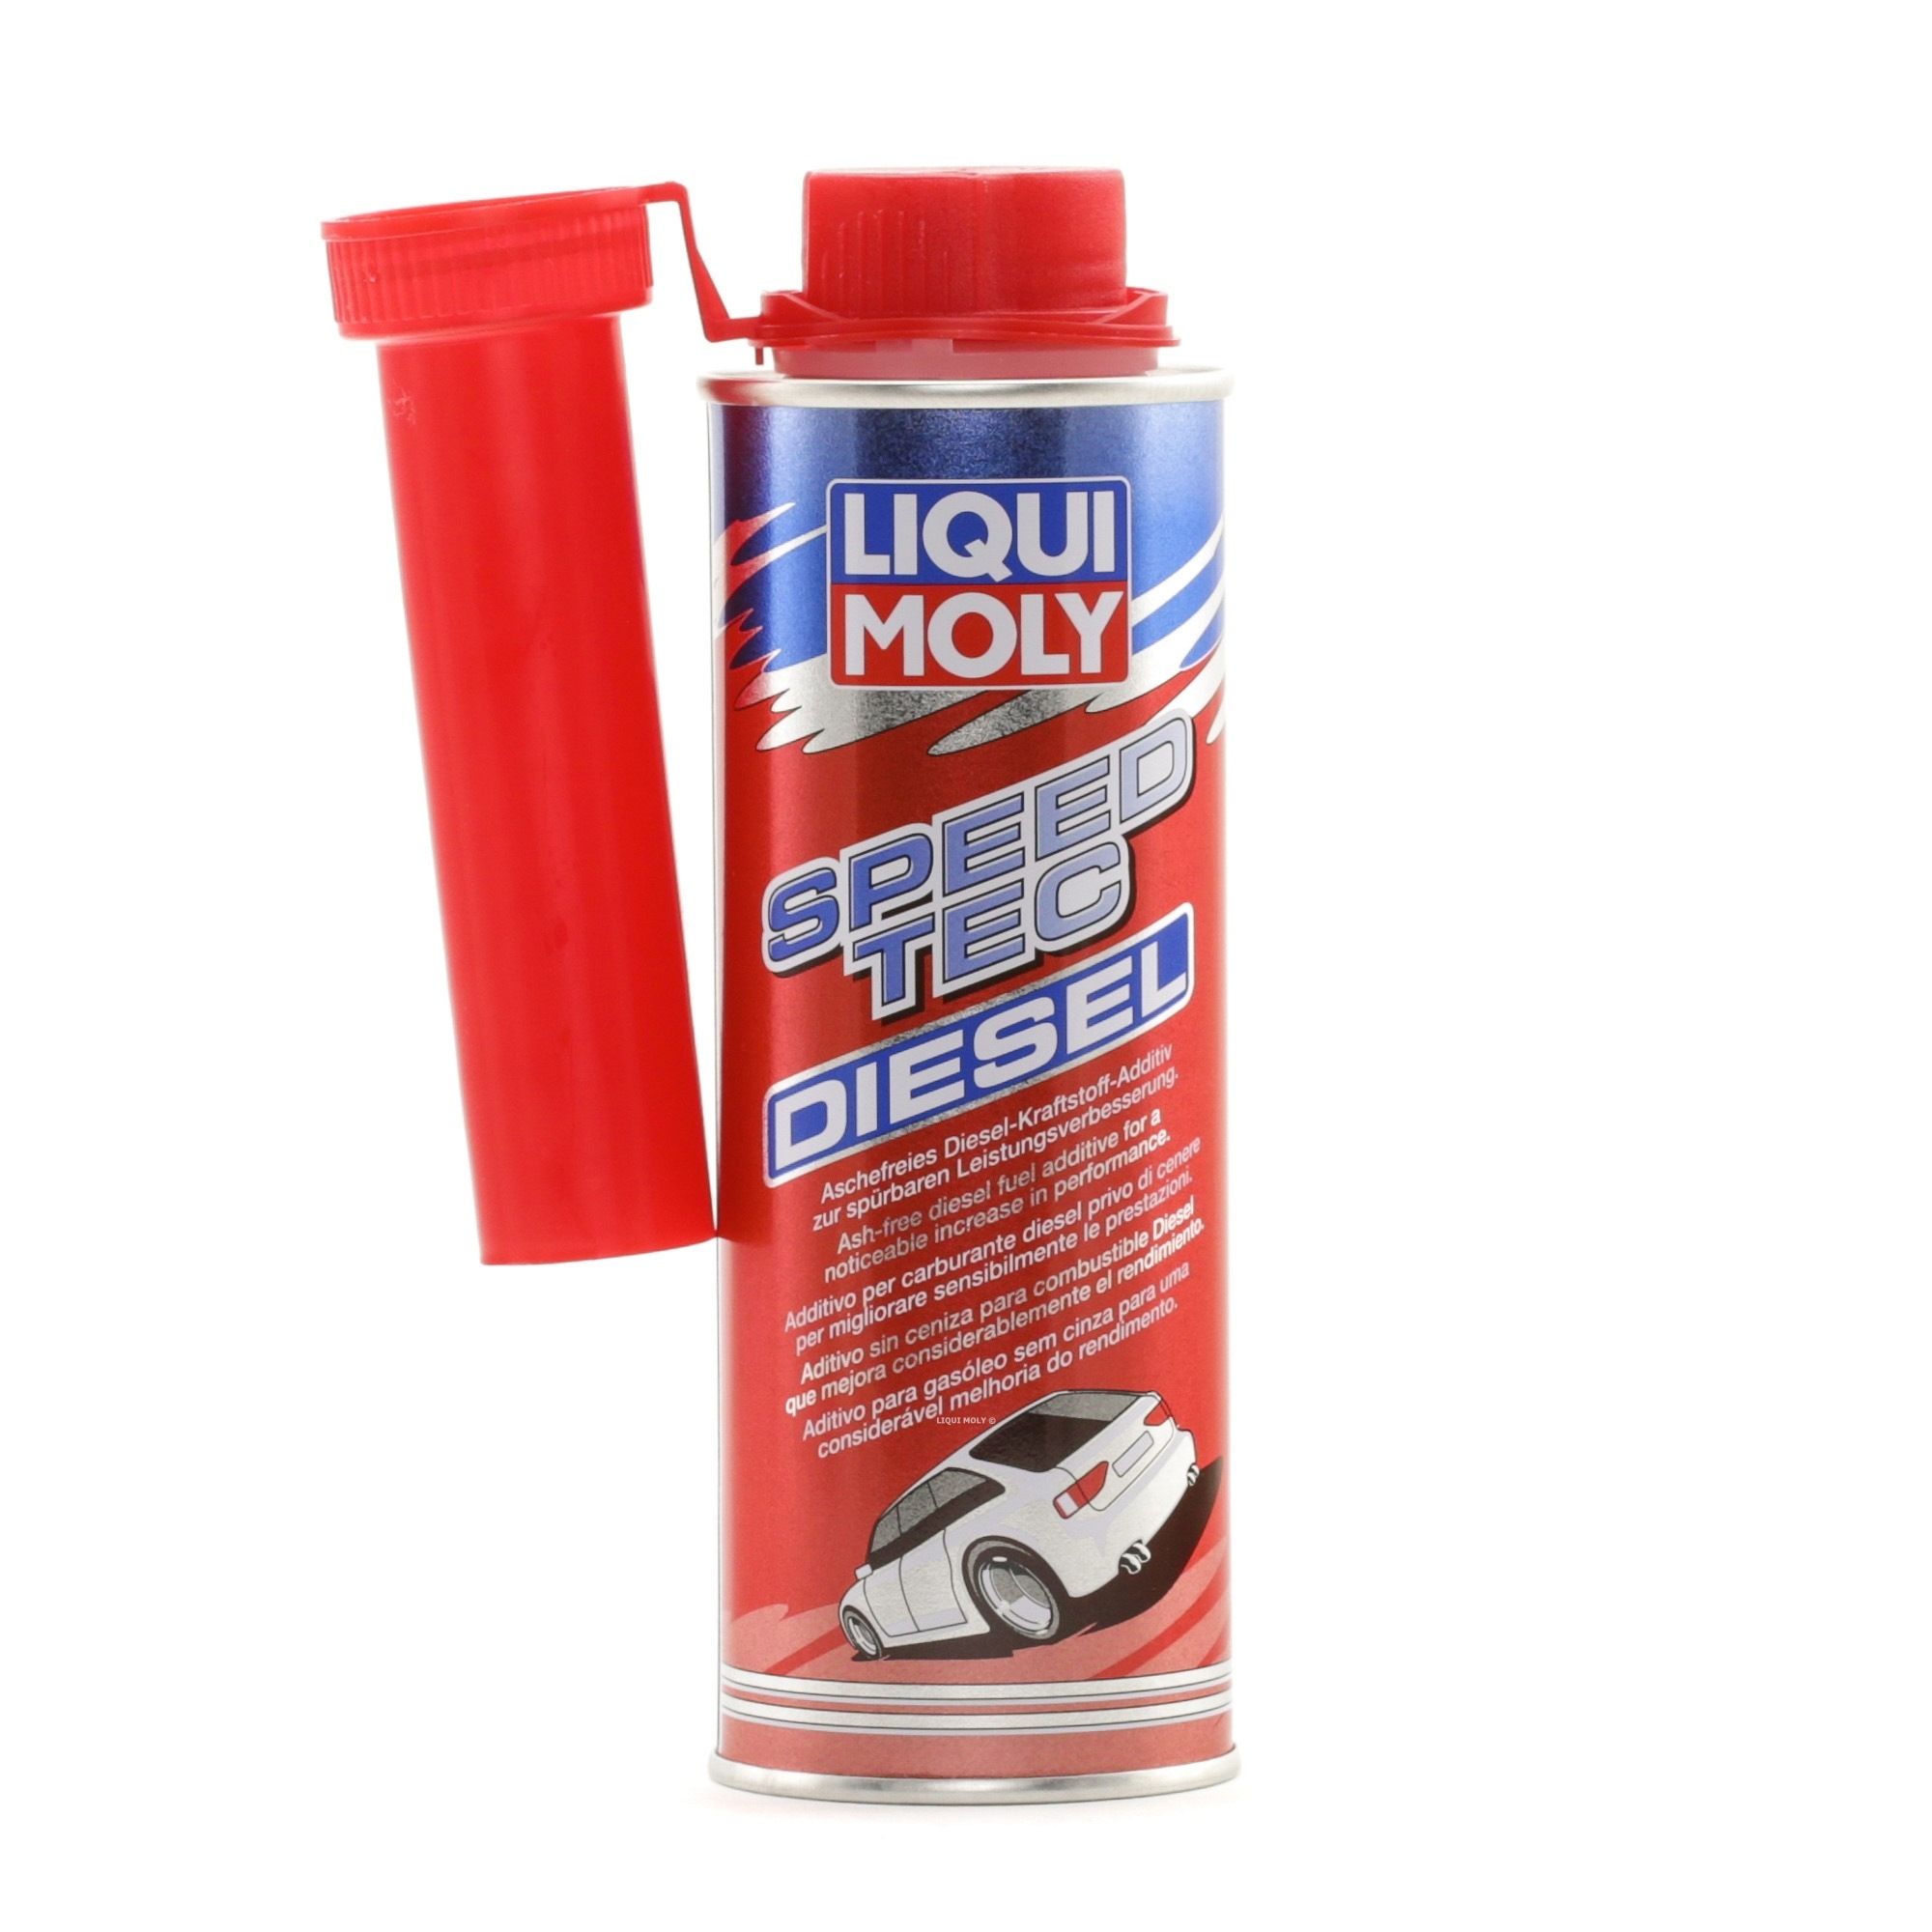 LIQUI MOLY 3722 Diesel additives to clean engine Tin, Capacity: 250ml, Diesel